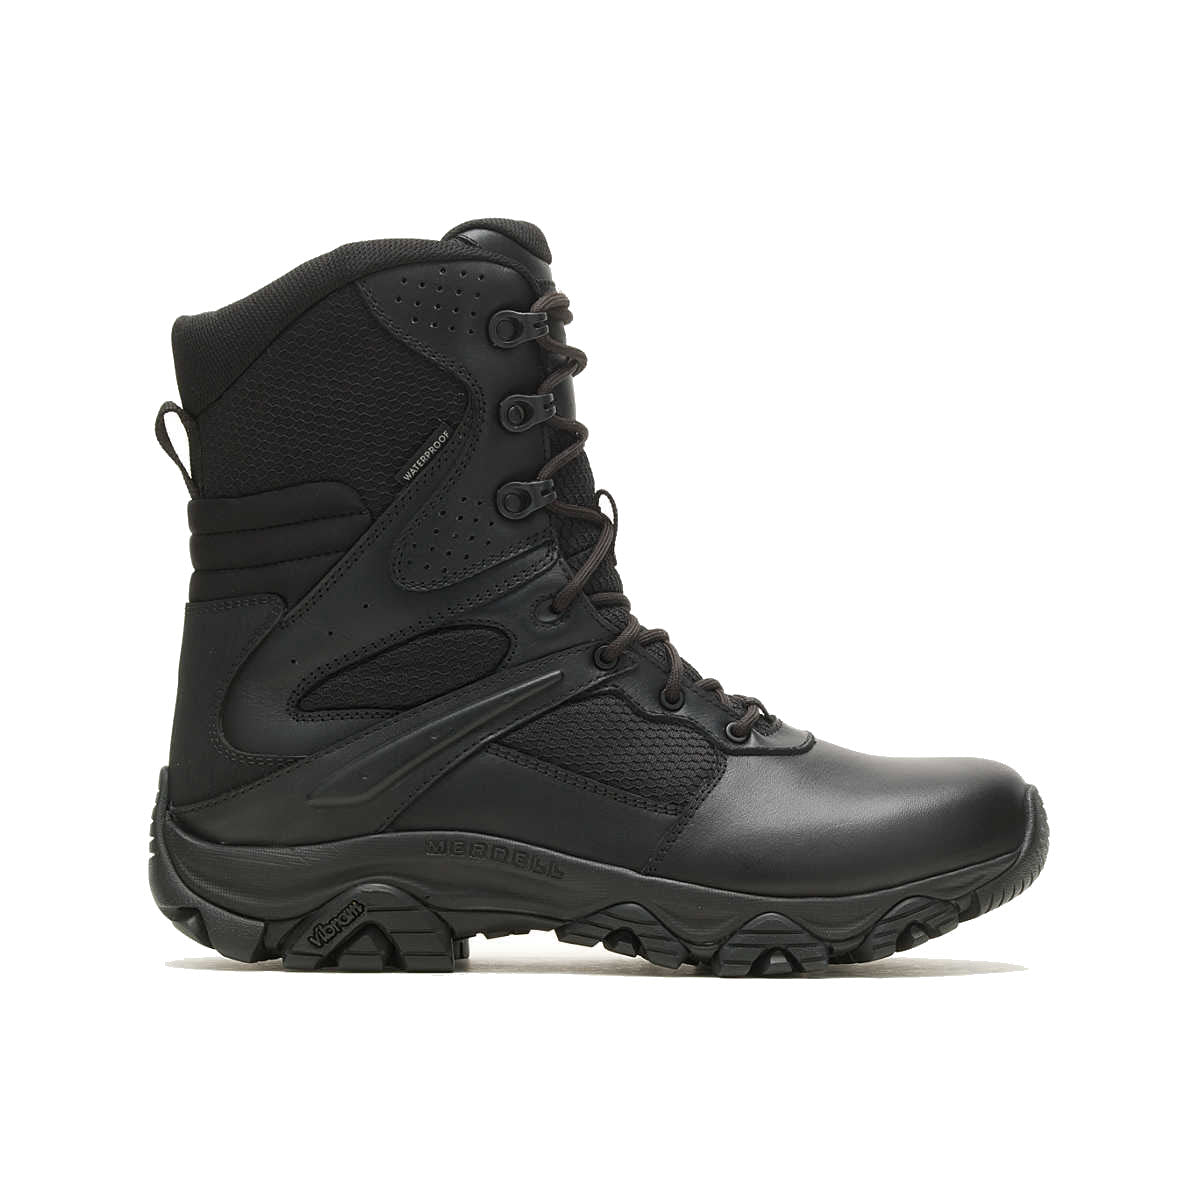 A black waterproof leather Merrell tactical boot with a high ankle design, lace-up front, and rugged sole.